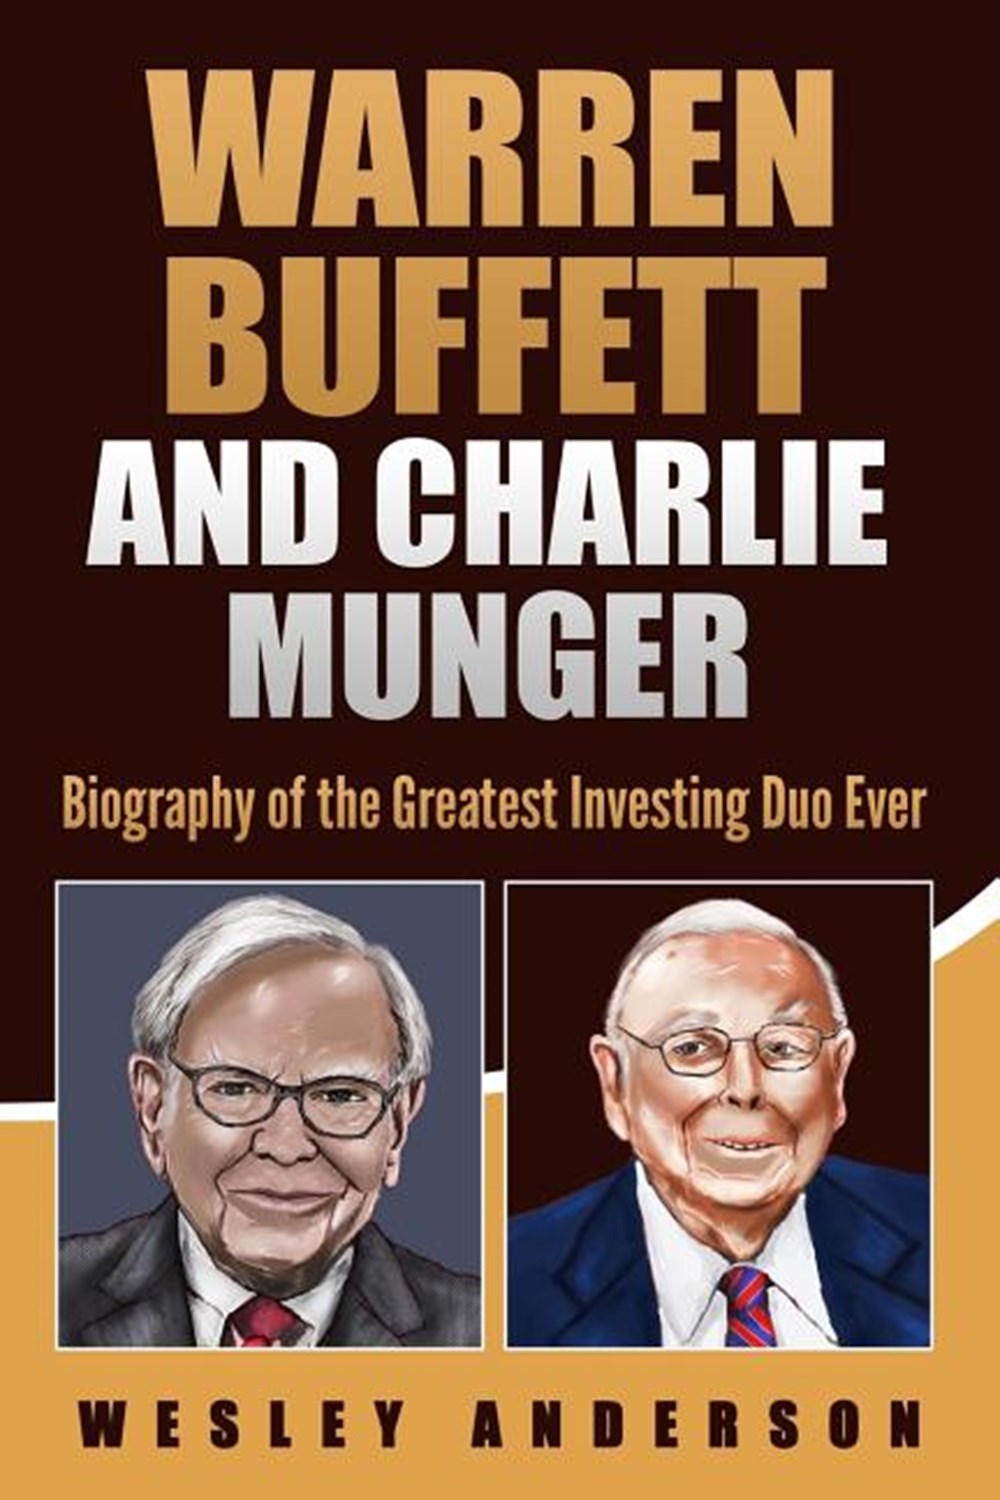 Warren Buffett and Charlie Munger Biography of the Greatest Investing Duo Ever